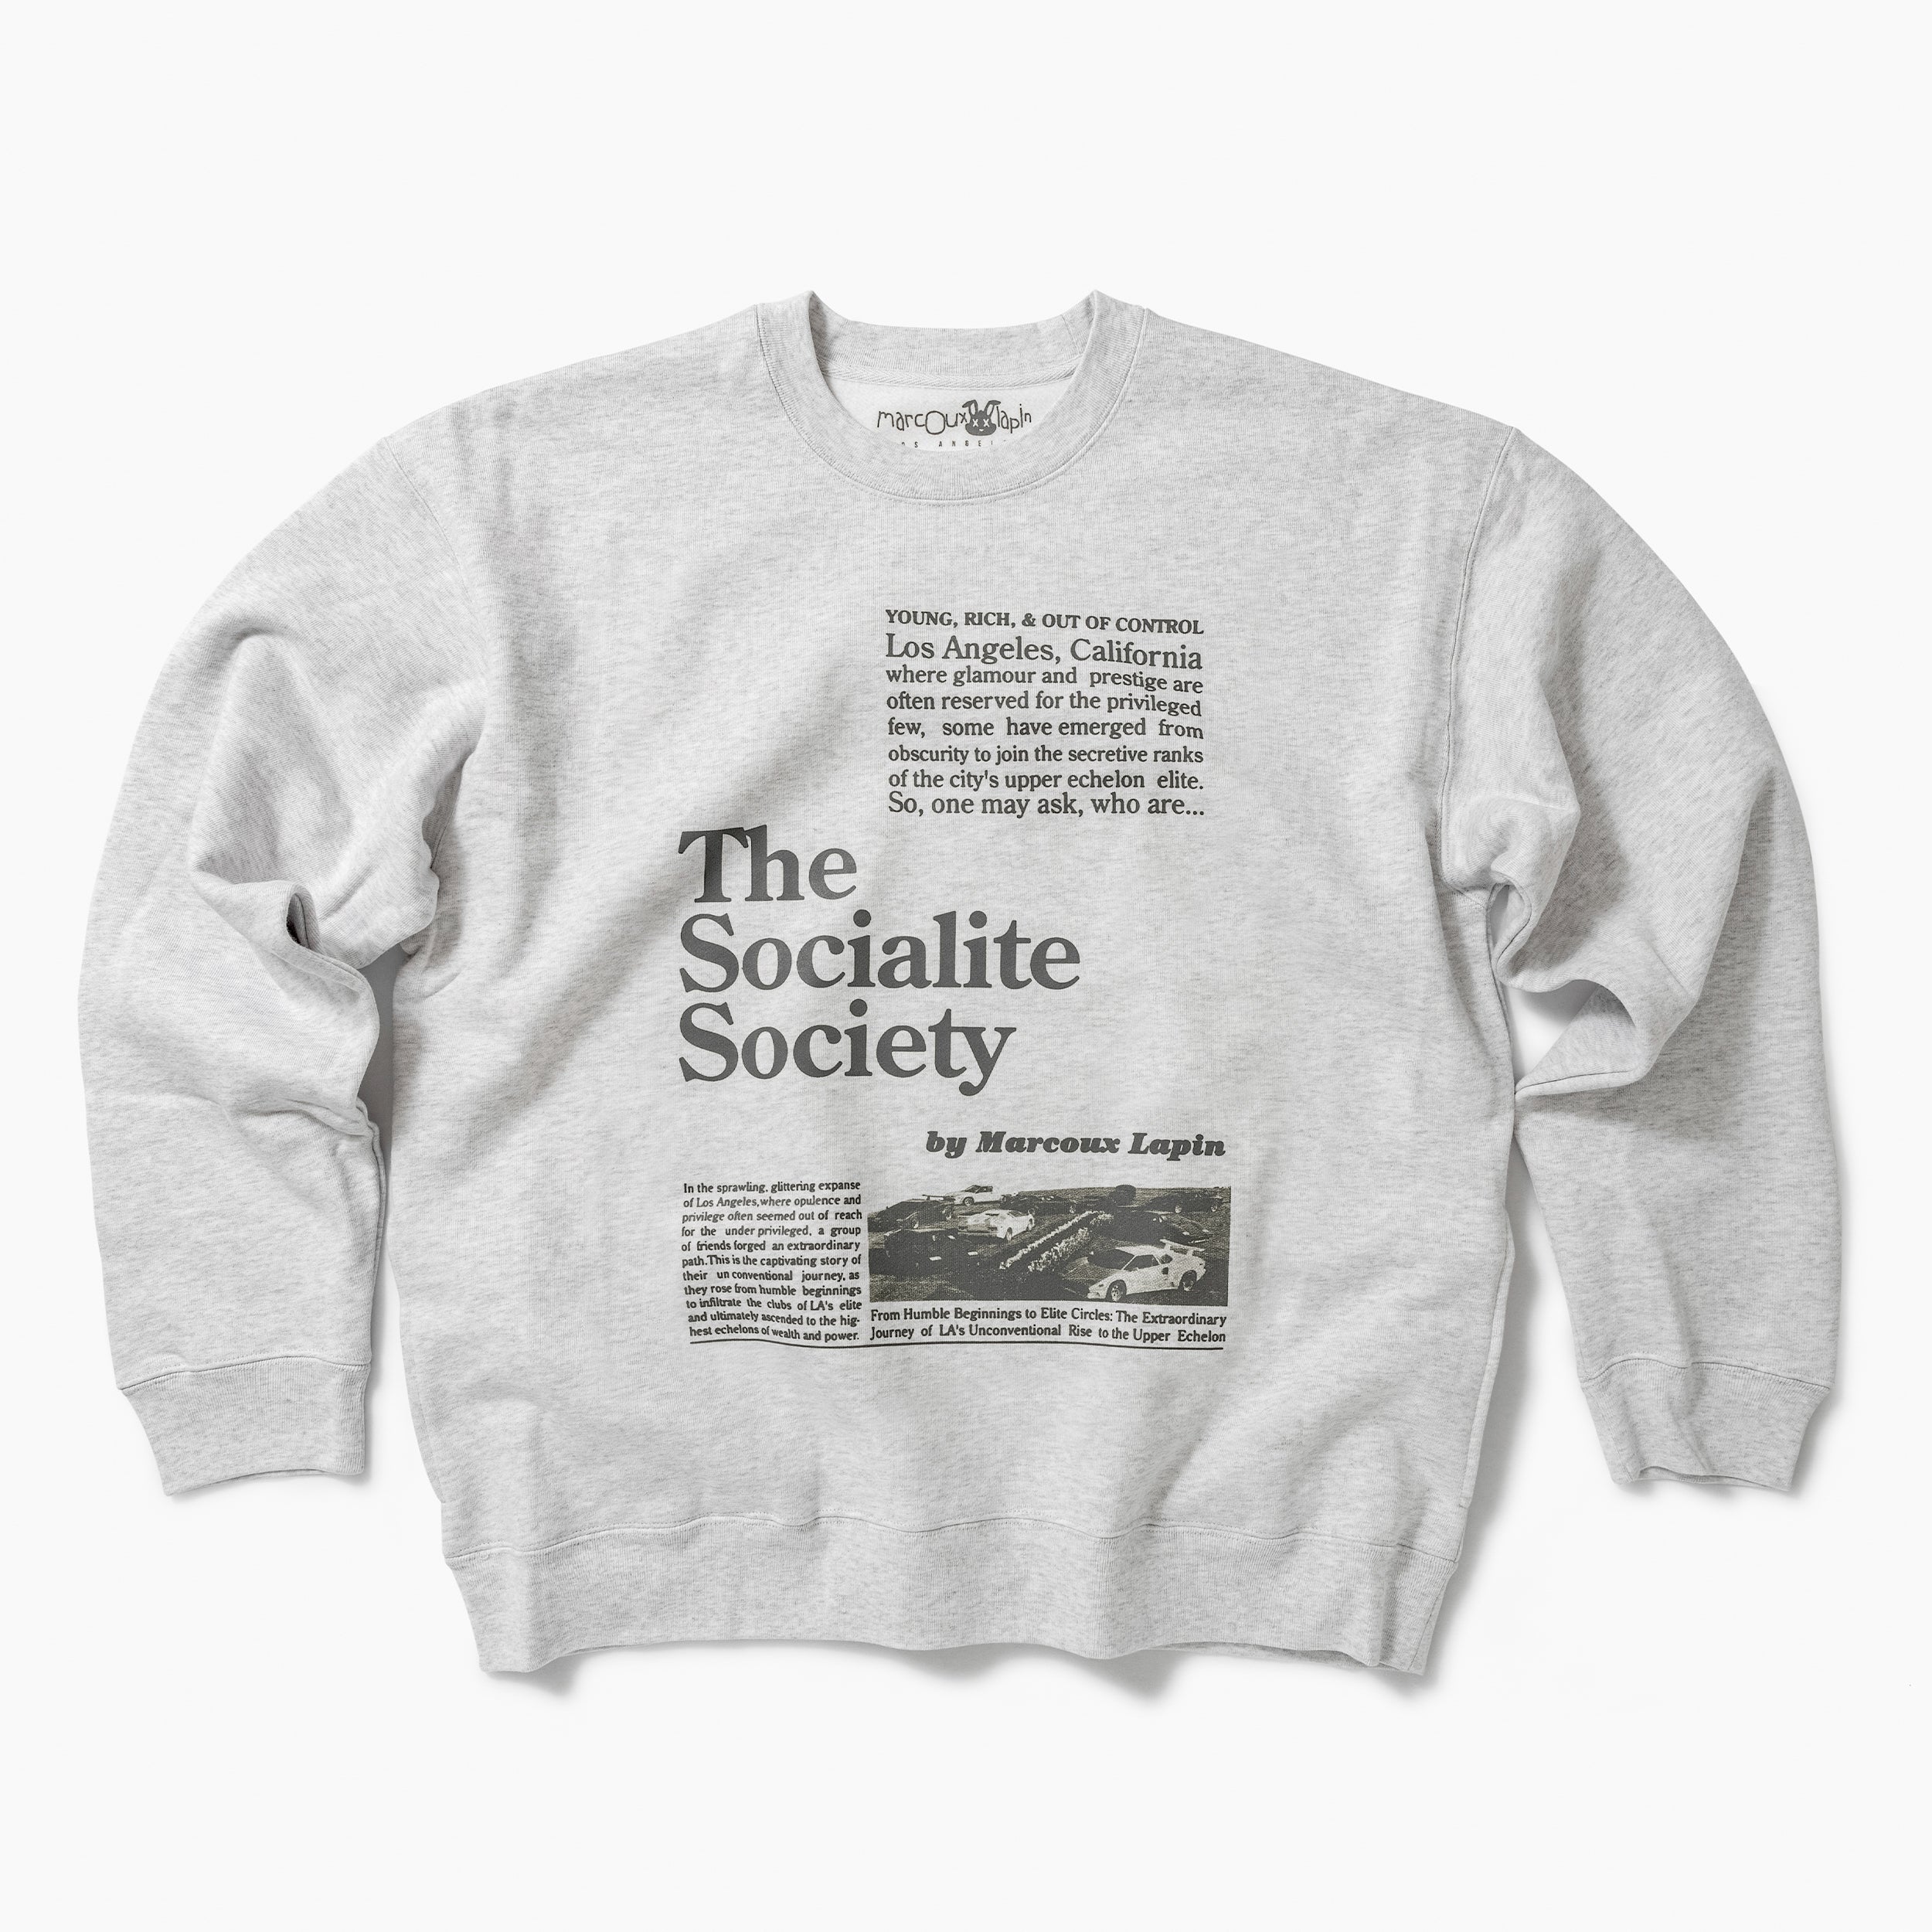 The Socialite Society Article Sweatshirt with side-pockets (Heather Gray)